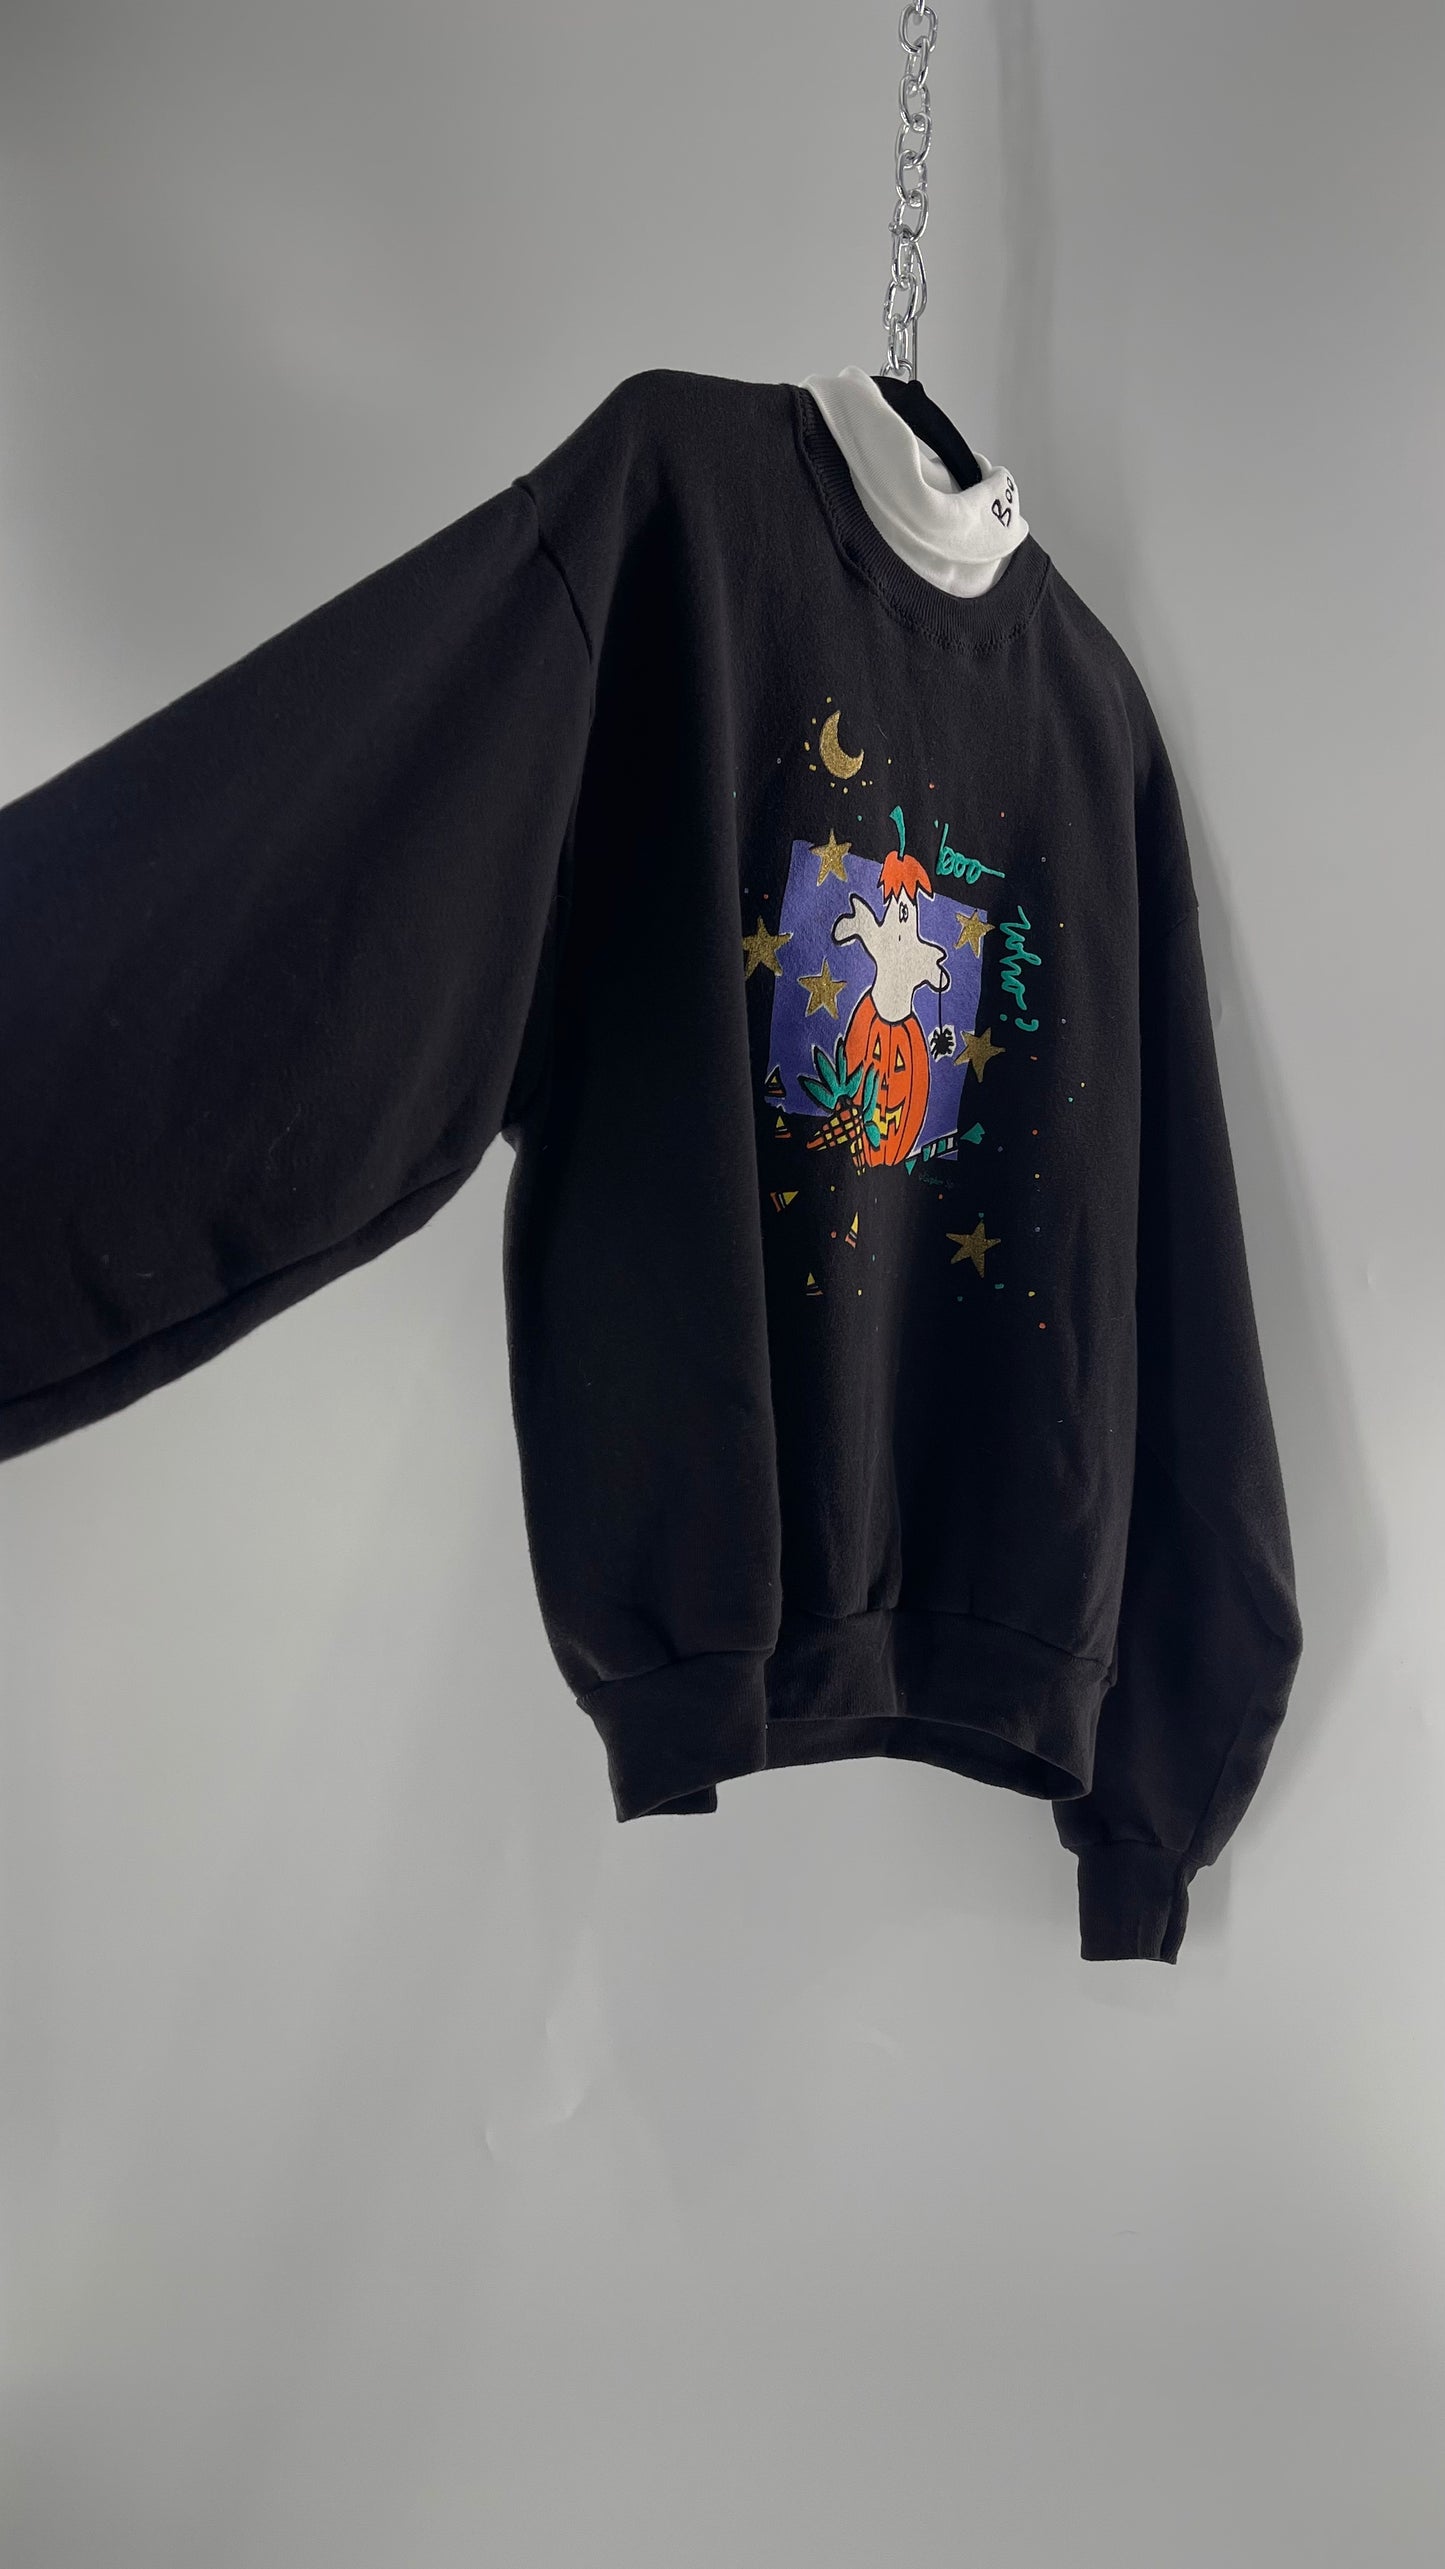 Vintage Black Halloween Graphic Crewneck with White Turtleneck Detail and Boo Embroidery (Large)